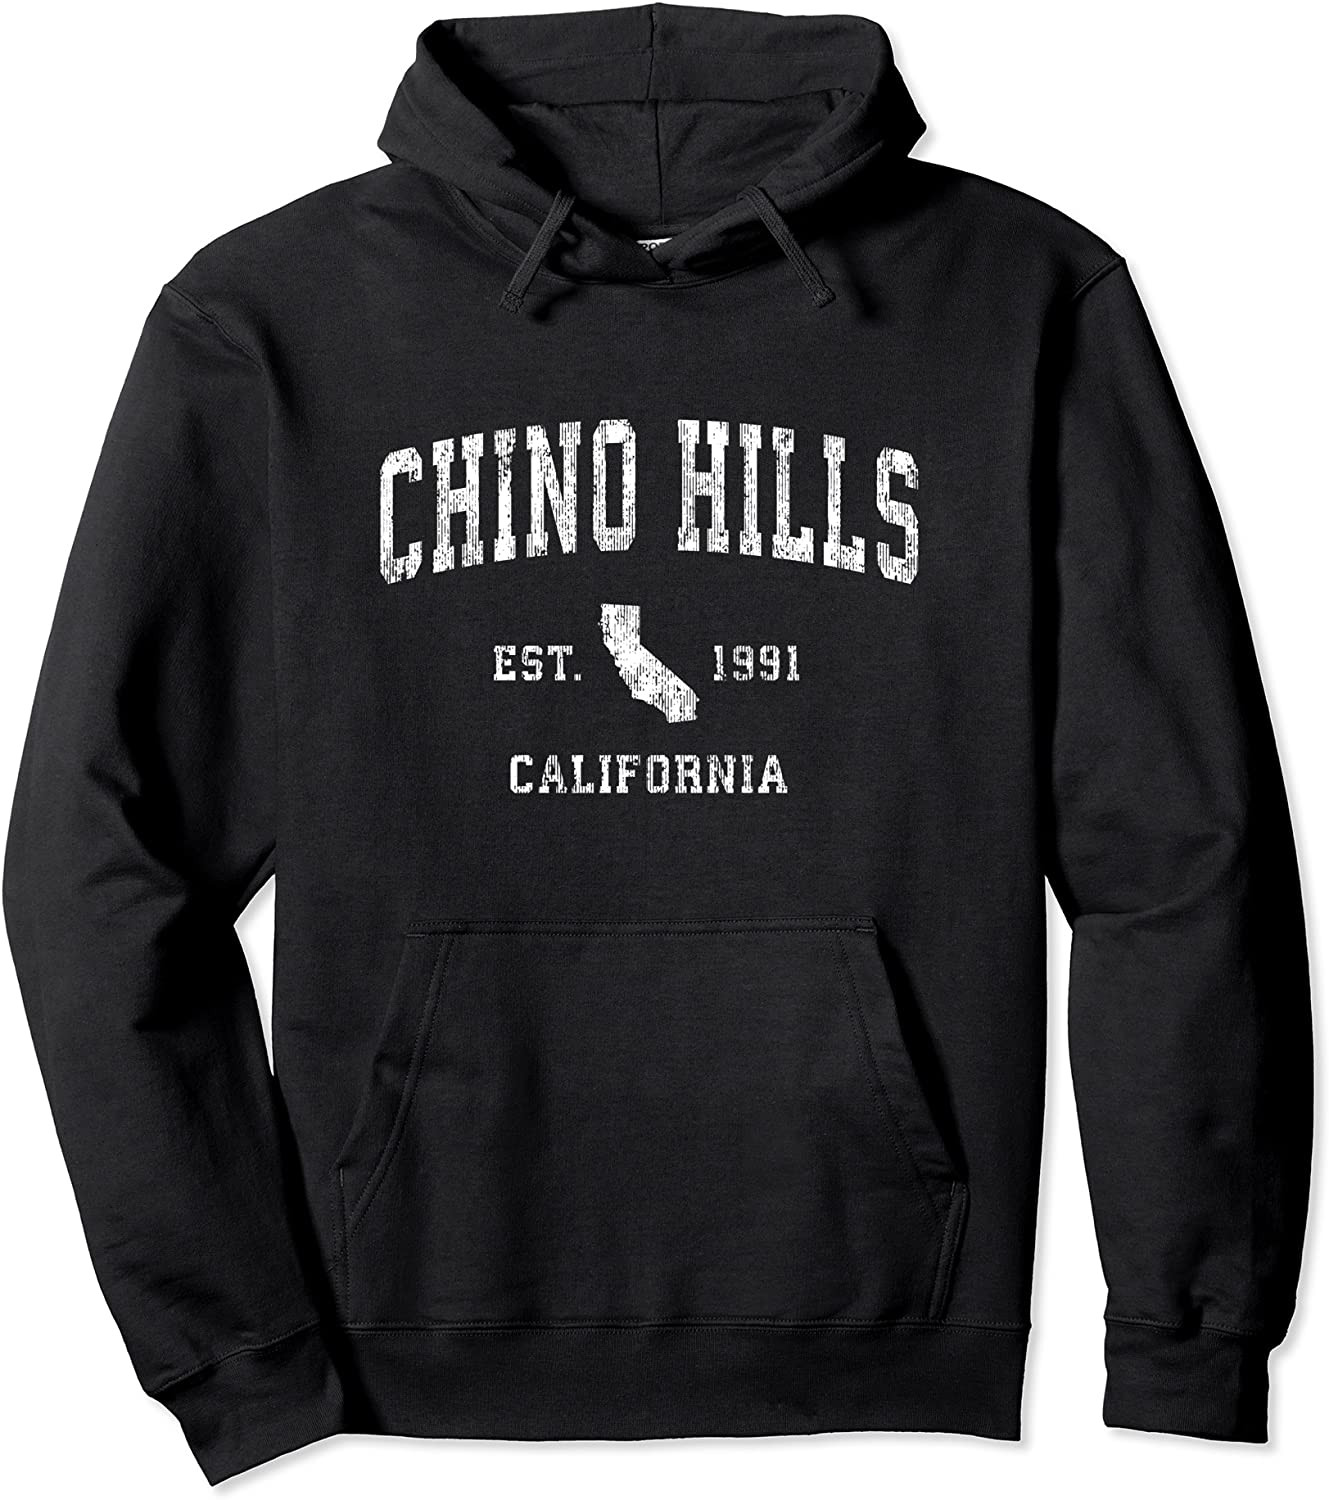 Chino Hills California Ca Vintage Athletic Sports Design Pullover Hoodie